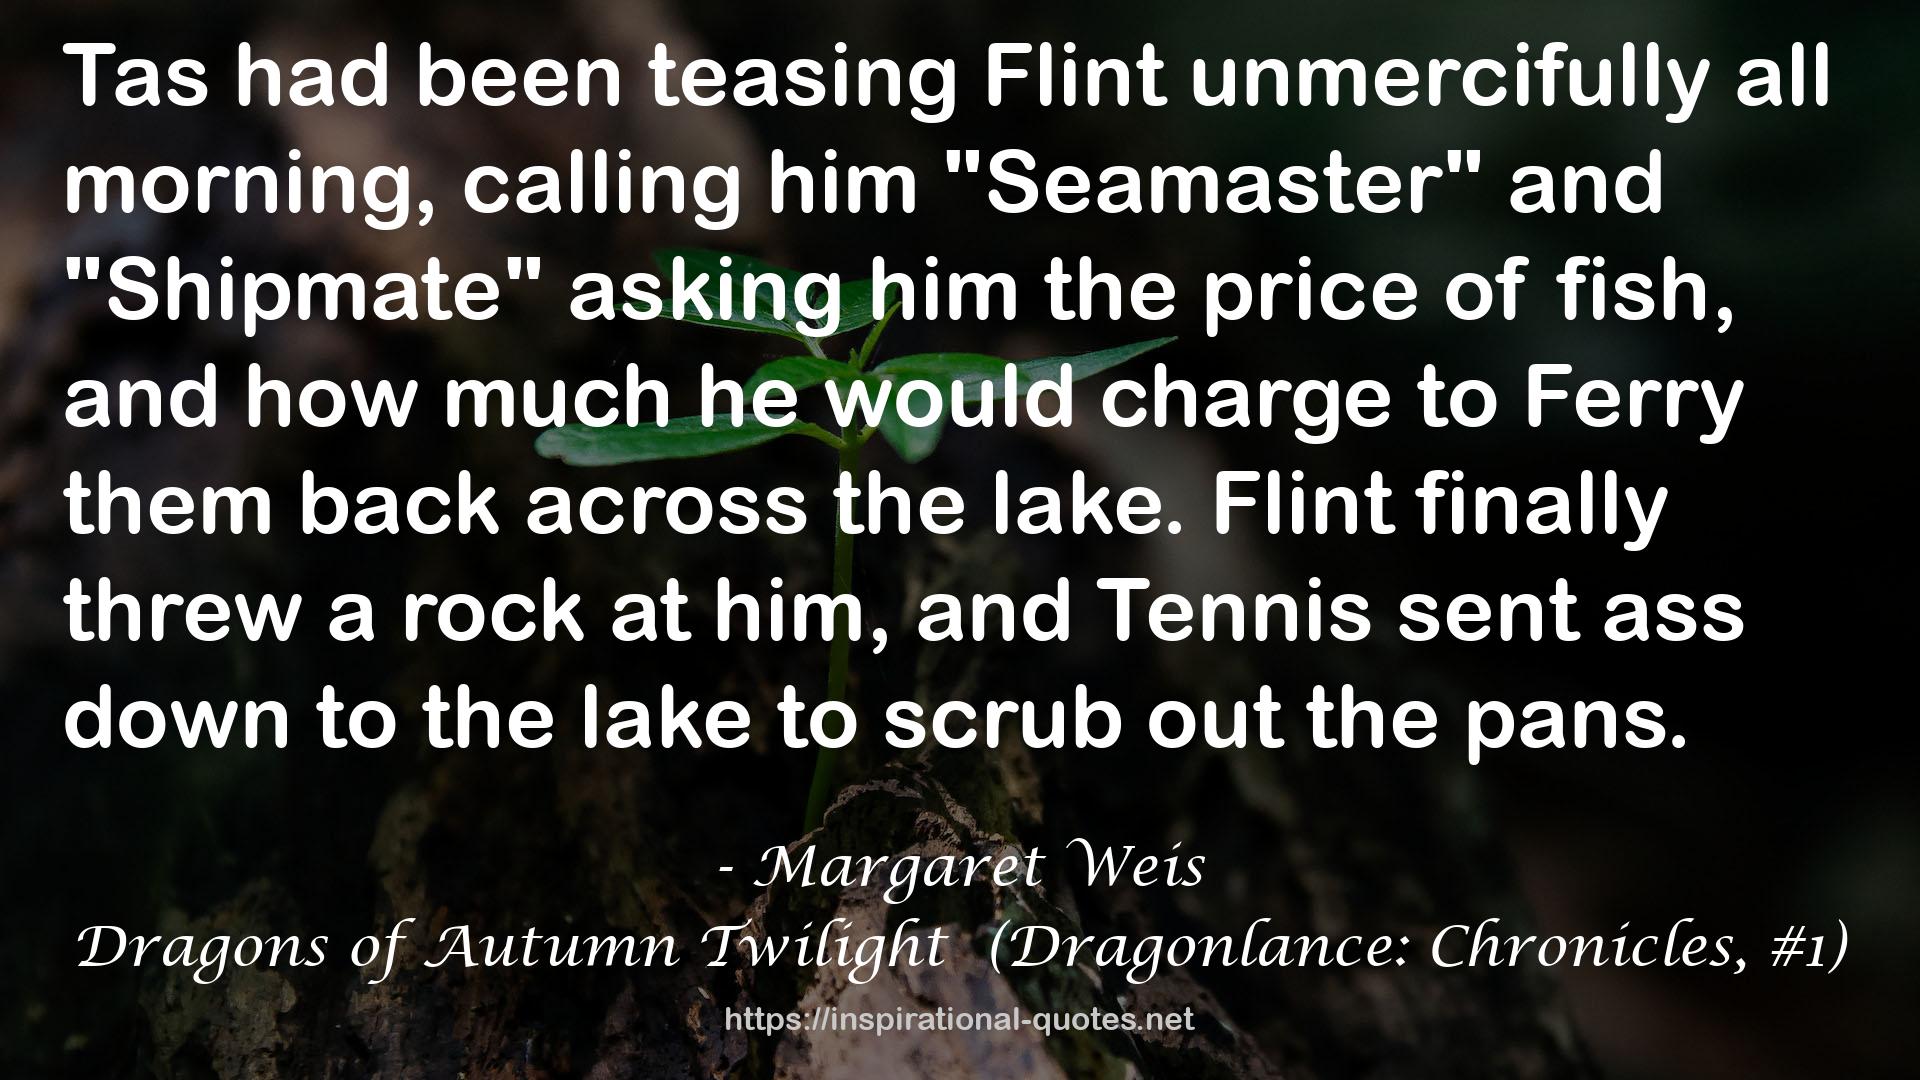 Dragons of Autumn Twilight  (Dragonlance: Chronicles, #1) QUOTES